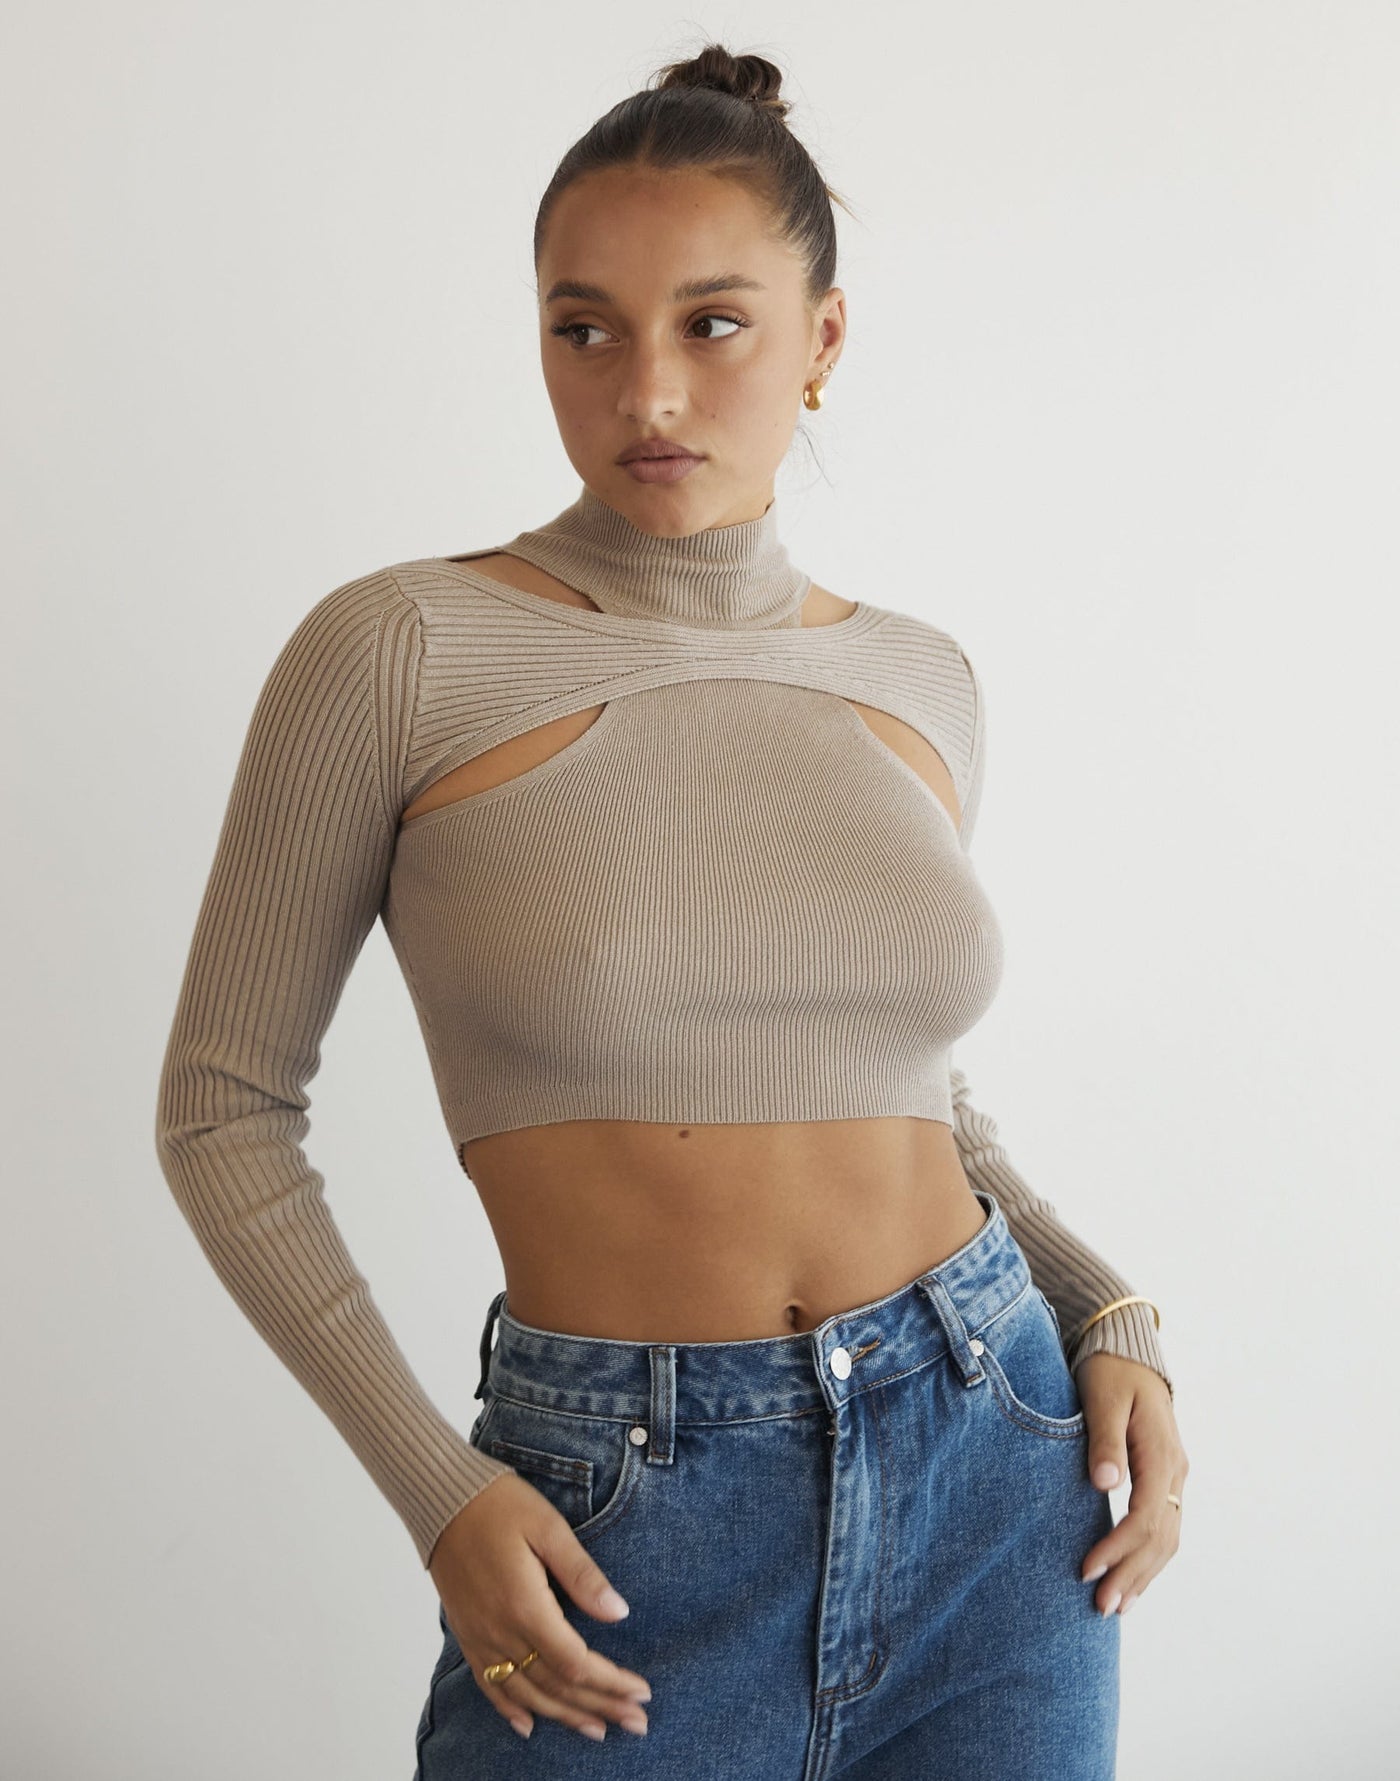 Kealey Long Sleeve Knit Top (Stone) - Cut-Out Long Sleeve Knit Top - Women's Top - Charcoal Clothing